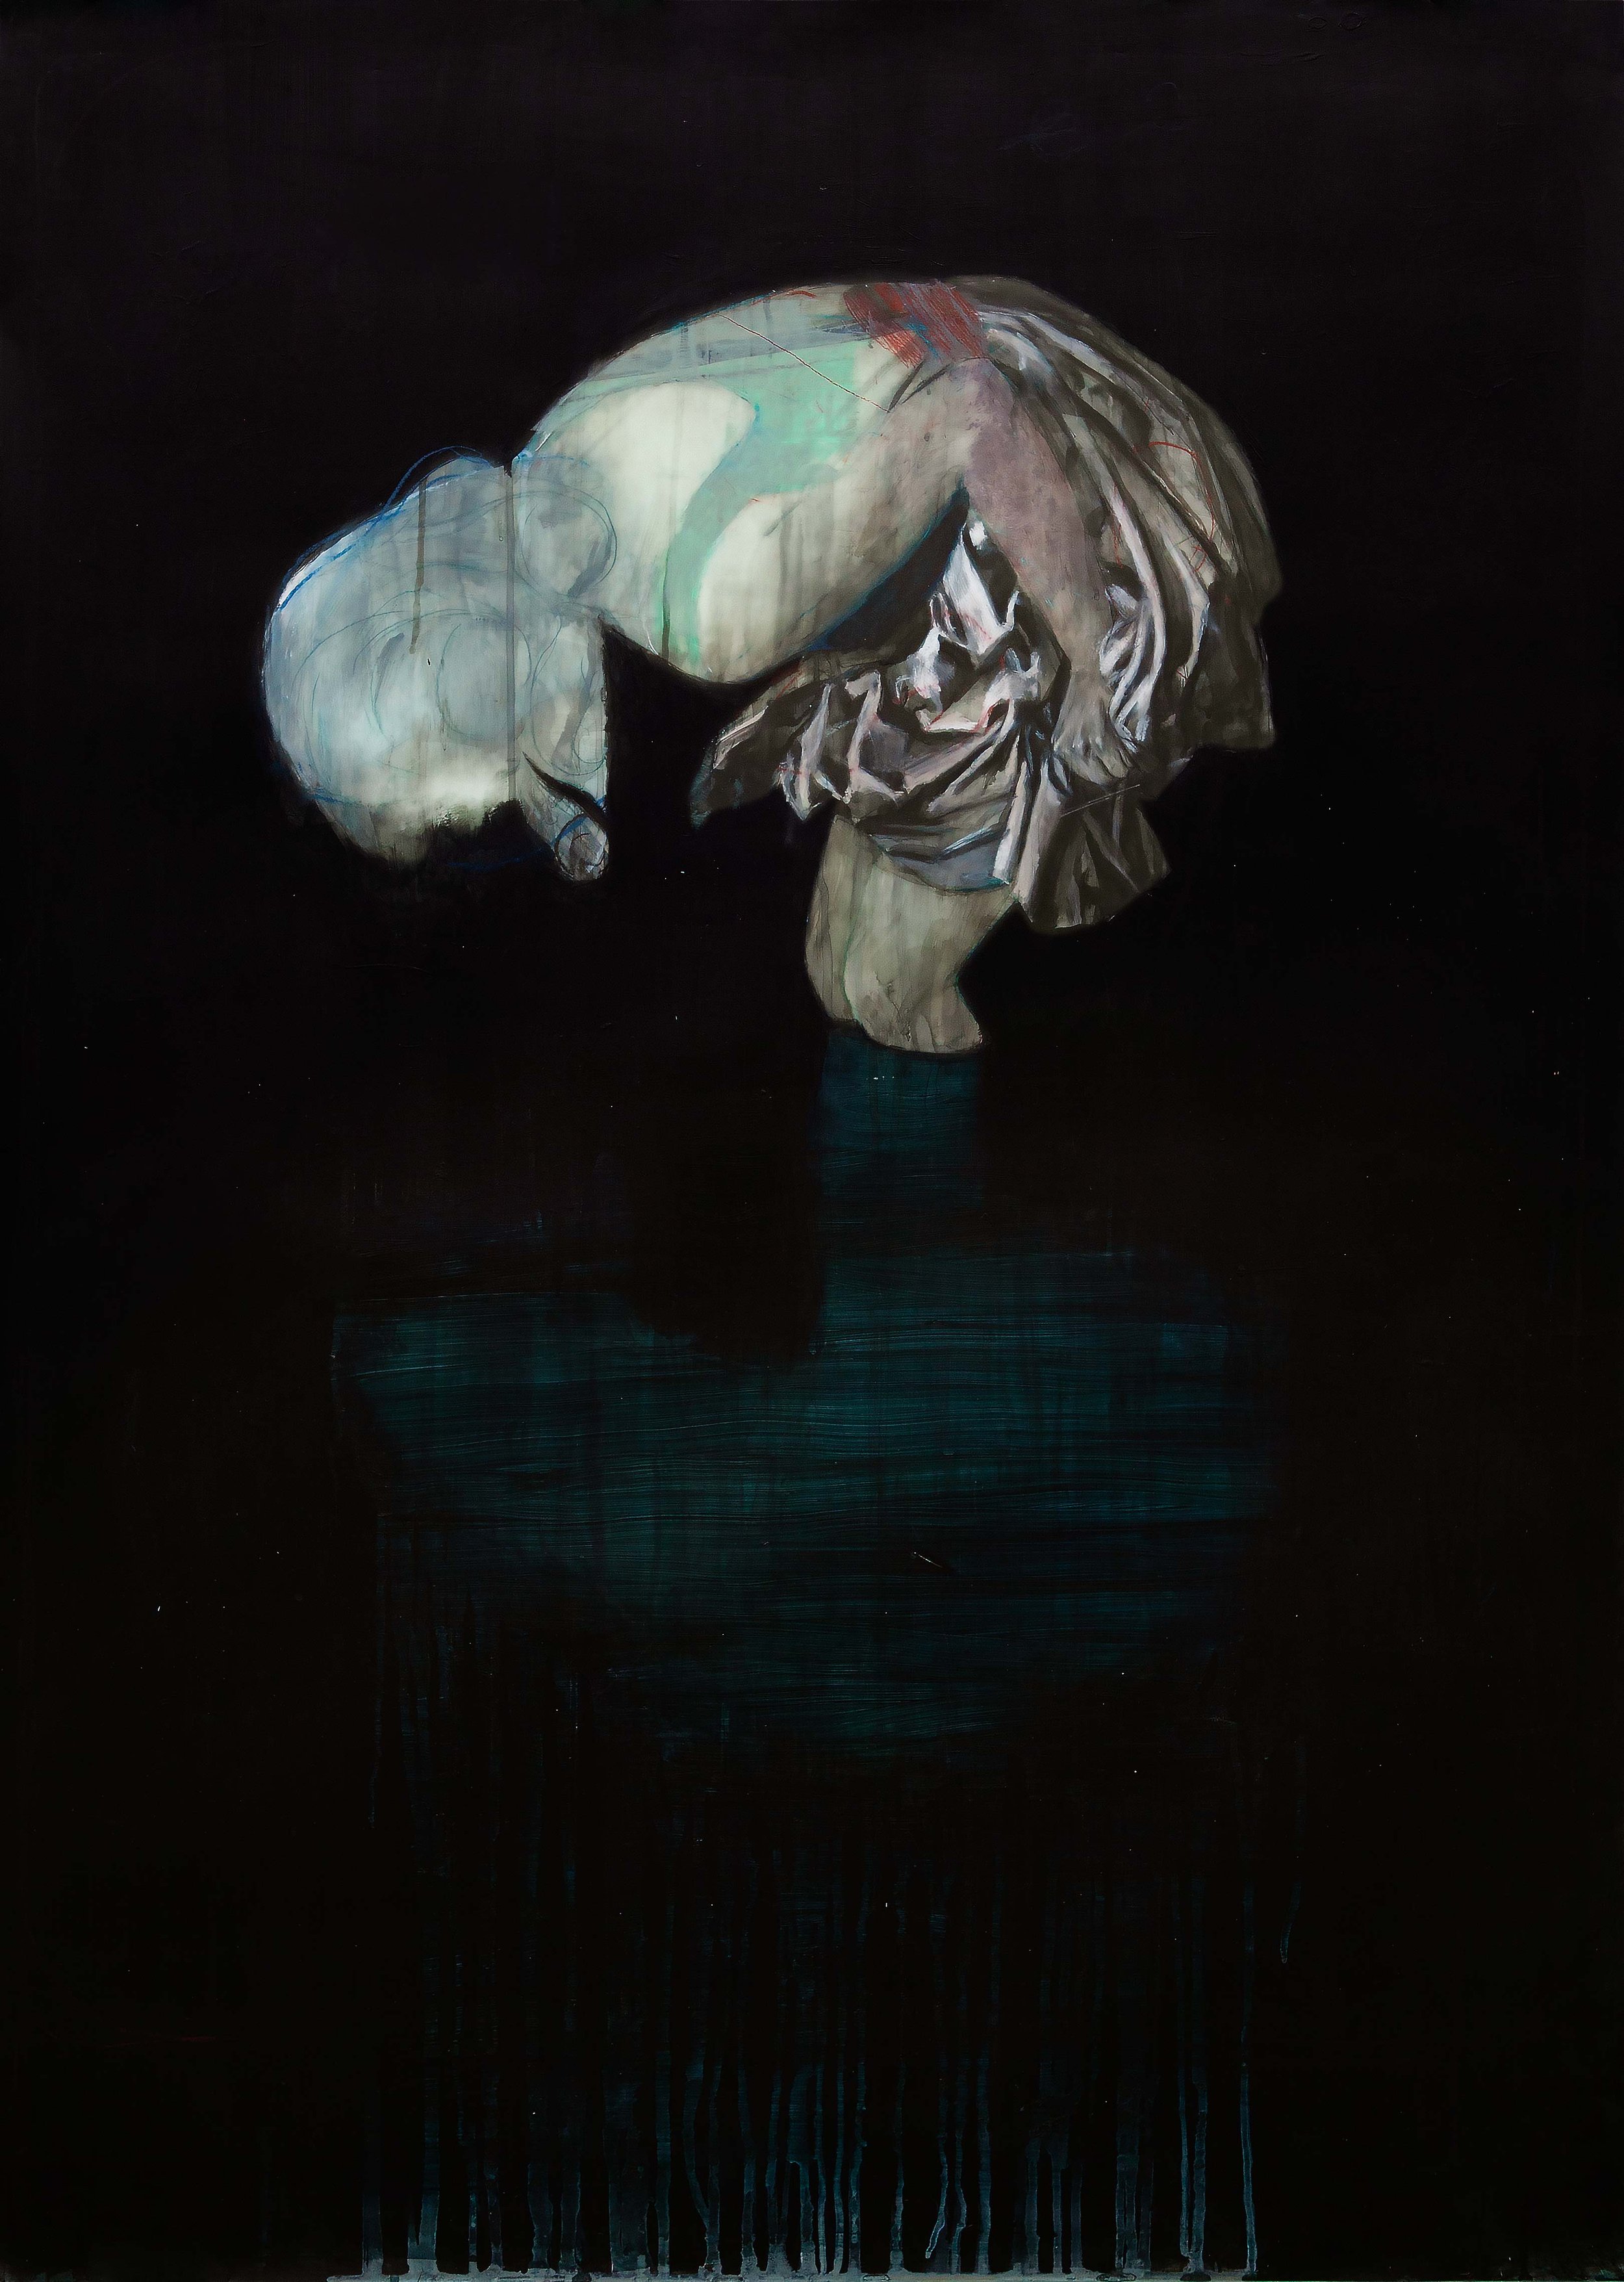   Narcissus  2018, Mixed media on polyester film 122 x 88 cm 